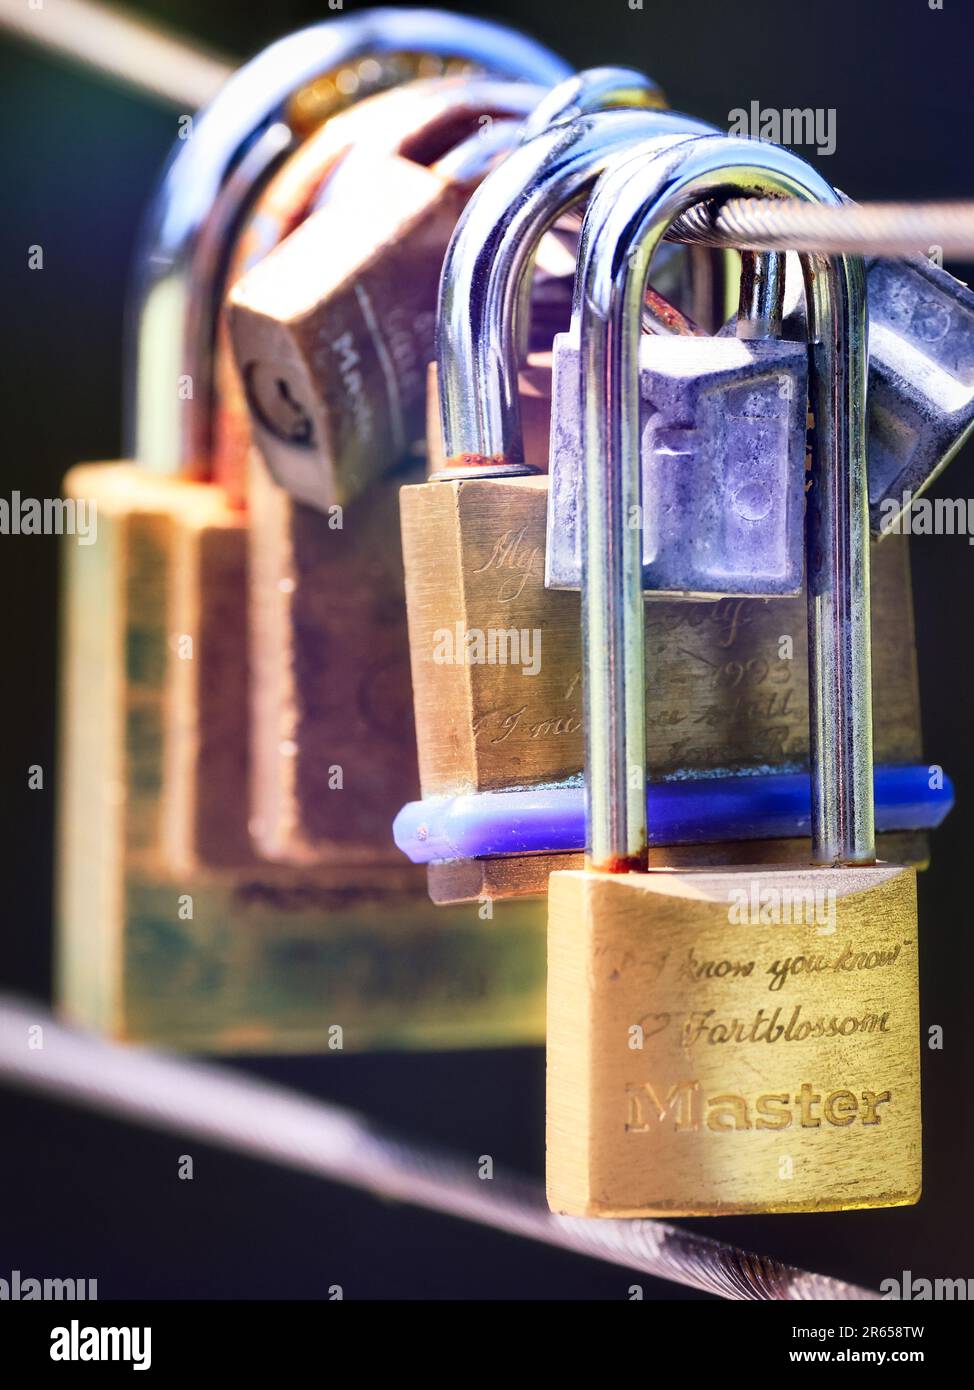 Alamy lockers Metallic photography - hi-res images stock and